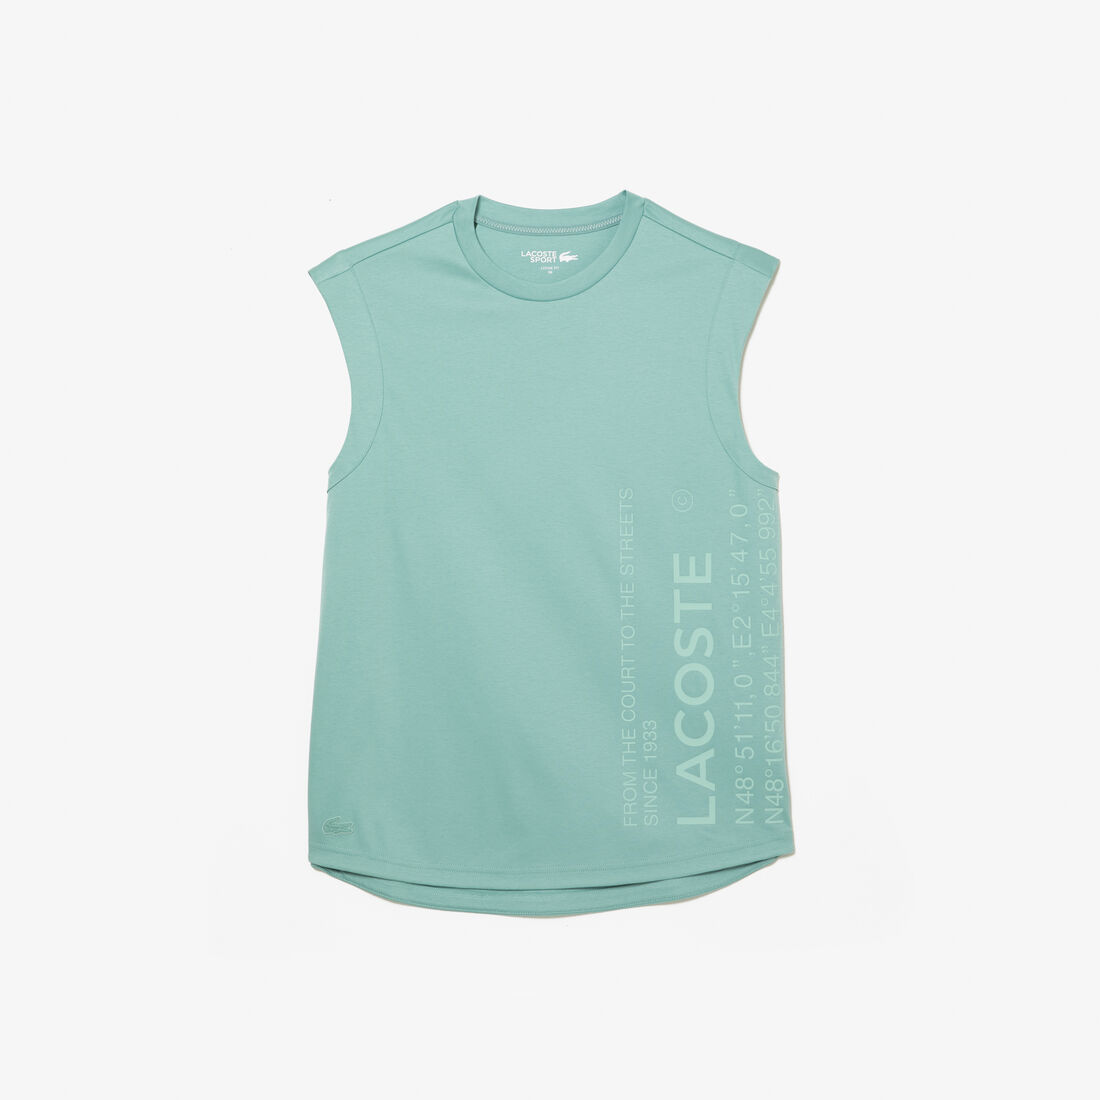 Women's Lacoste SPORT Loose Fit Branded Coordinate T-Shirt